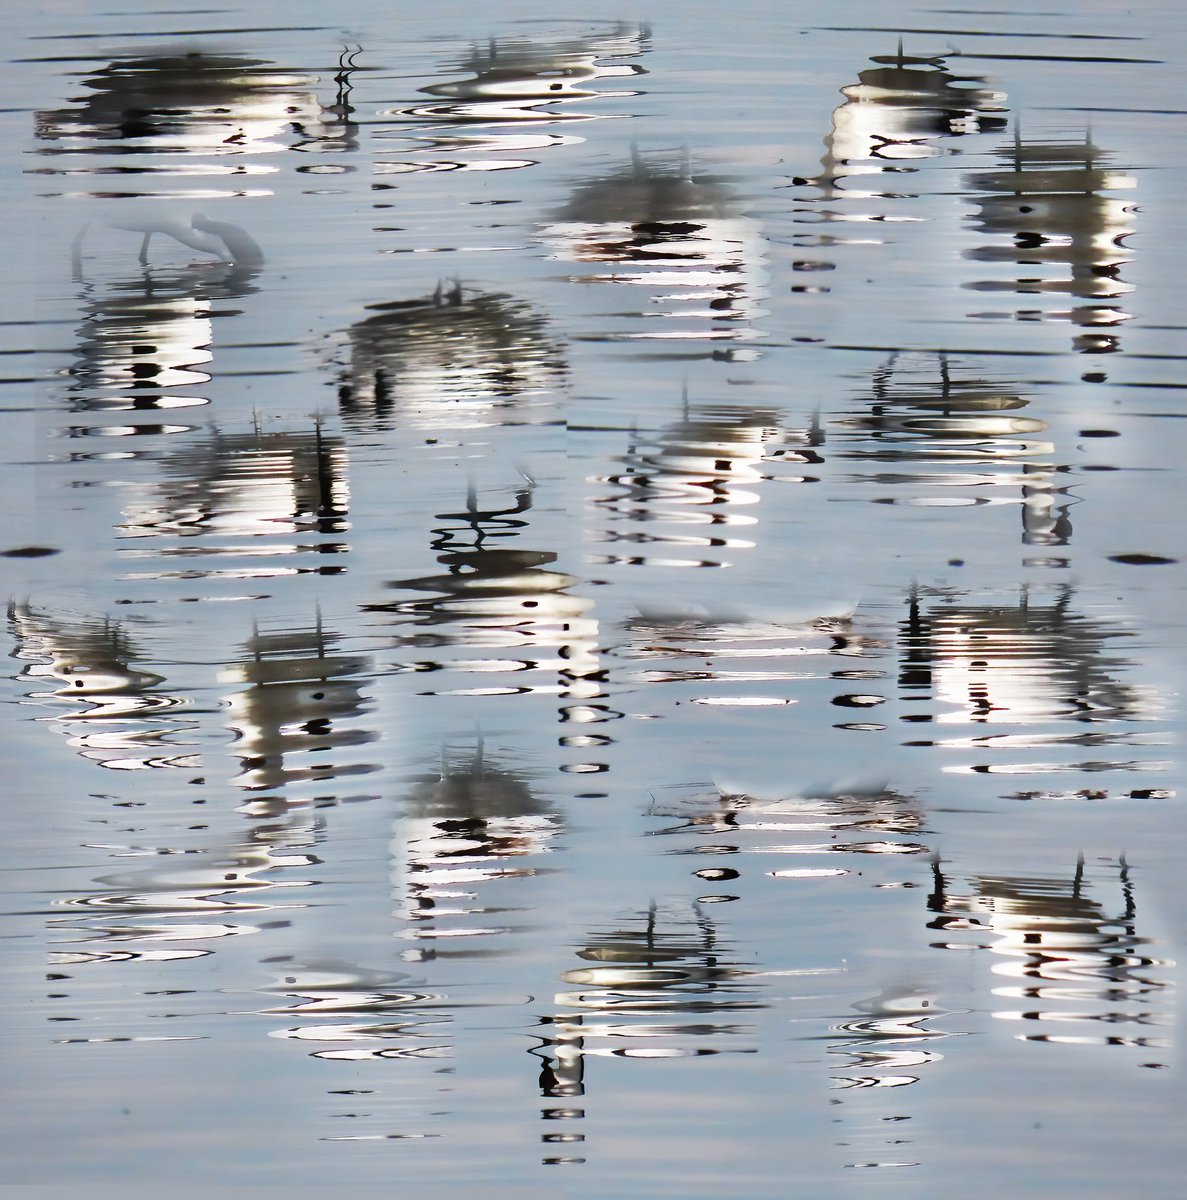 a montage of Avocet rippled reflections @ChrisGPackham